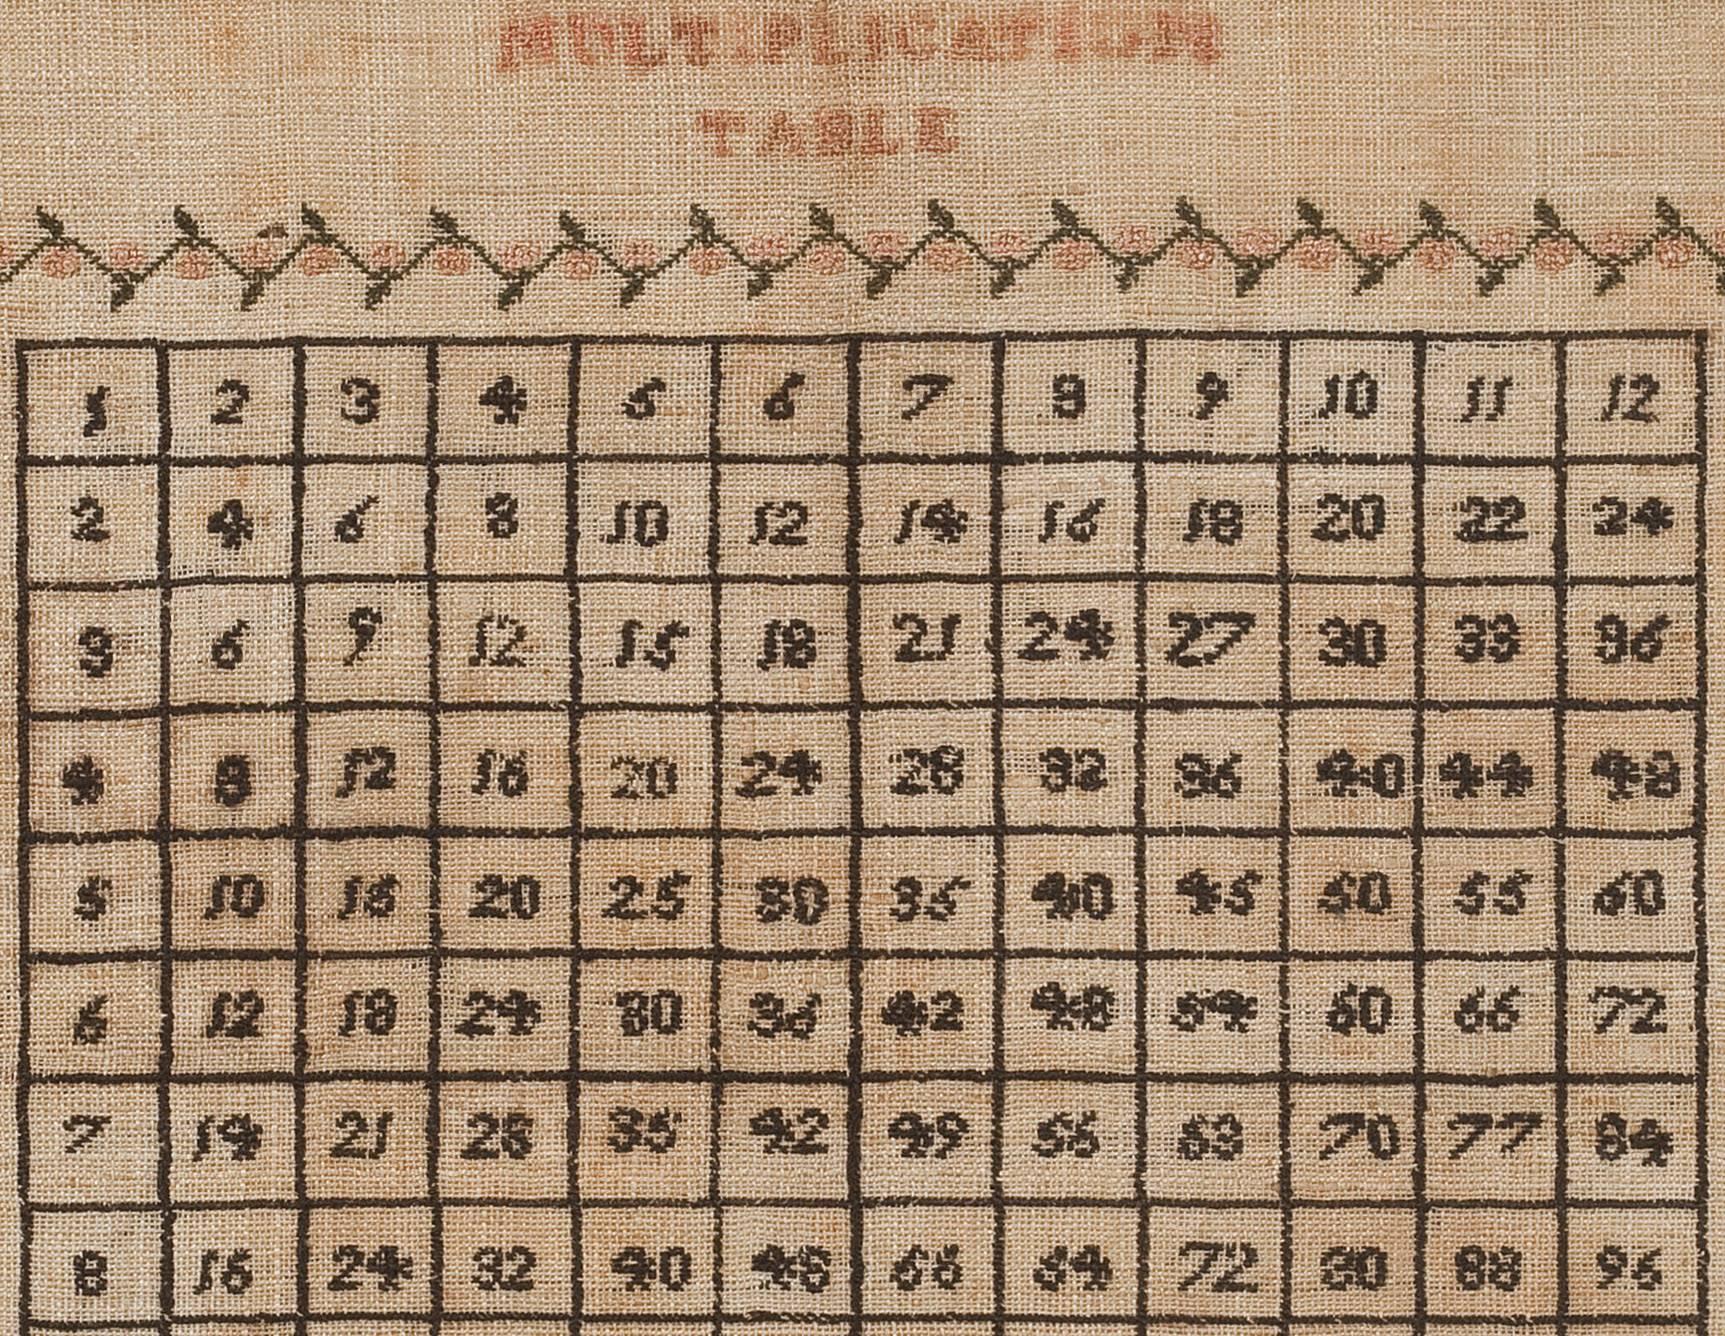 Rare multiplication table sampler made by Elizabeth Nield, England, 1816. 

Needlework was indeed at the forefront of the education of young girls throughout the 18th and early 19th centuries. In many schools, however, they would have certainly